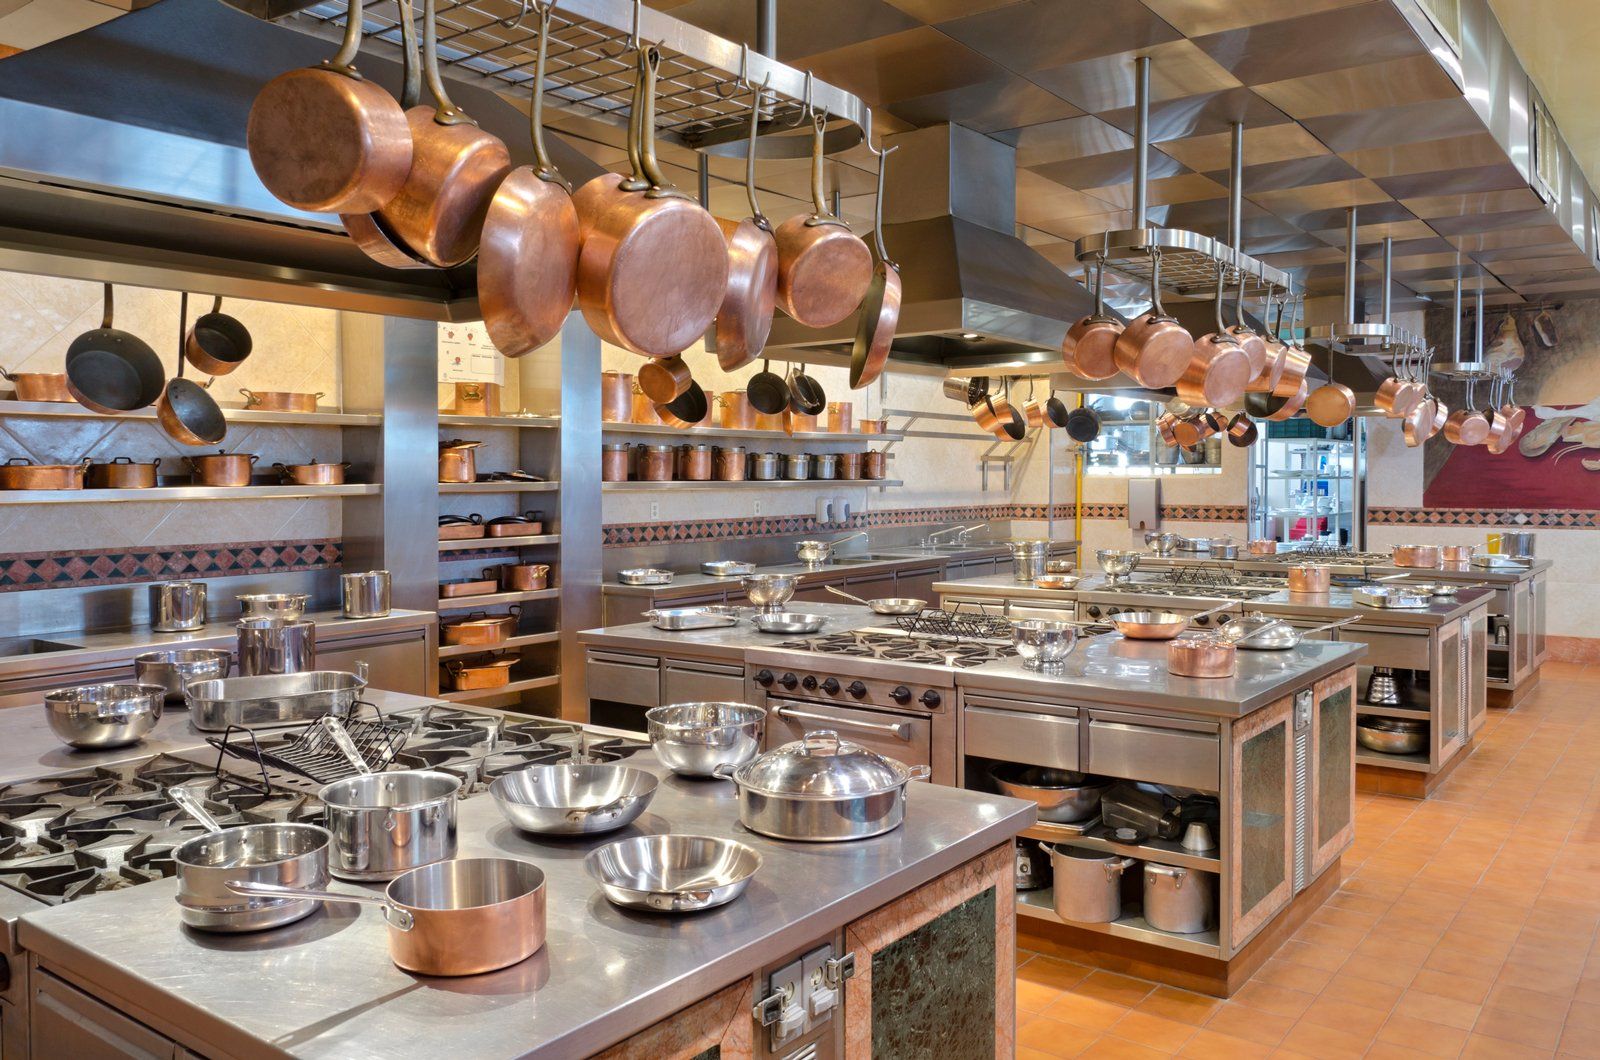 Commercial Kitchen & Restaurant Cleaning Services for Connecticut